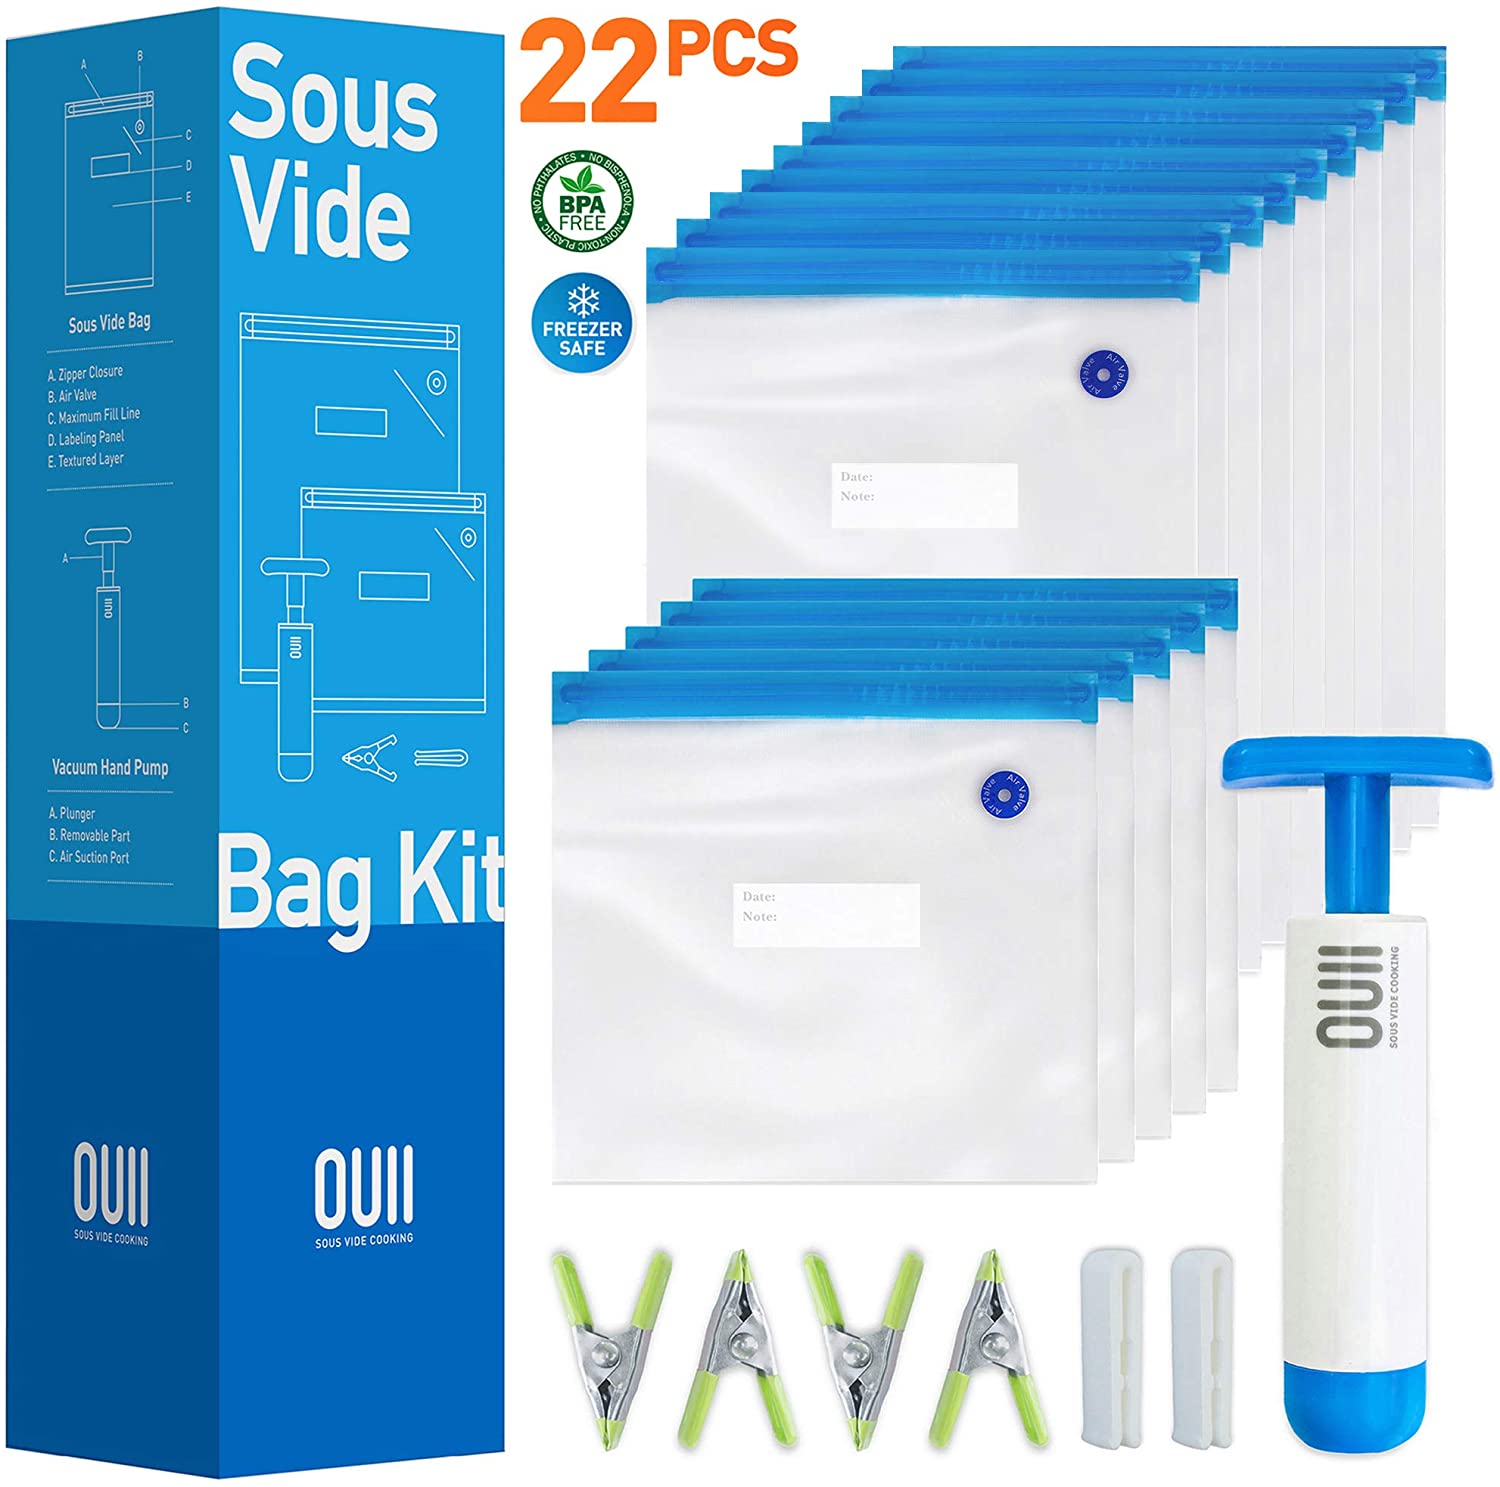 Sous Vide Bags for Anova or Joule Cookers - 10 Reusable Food